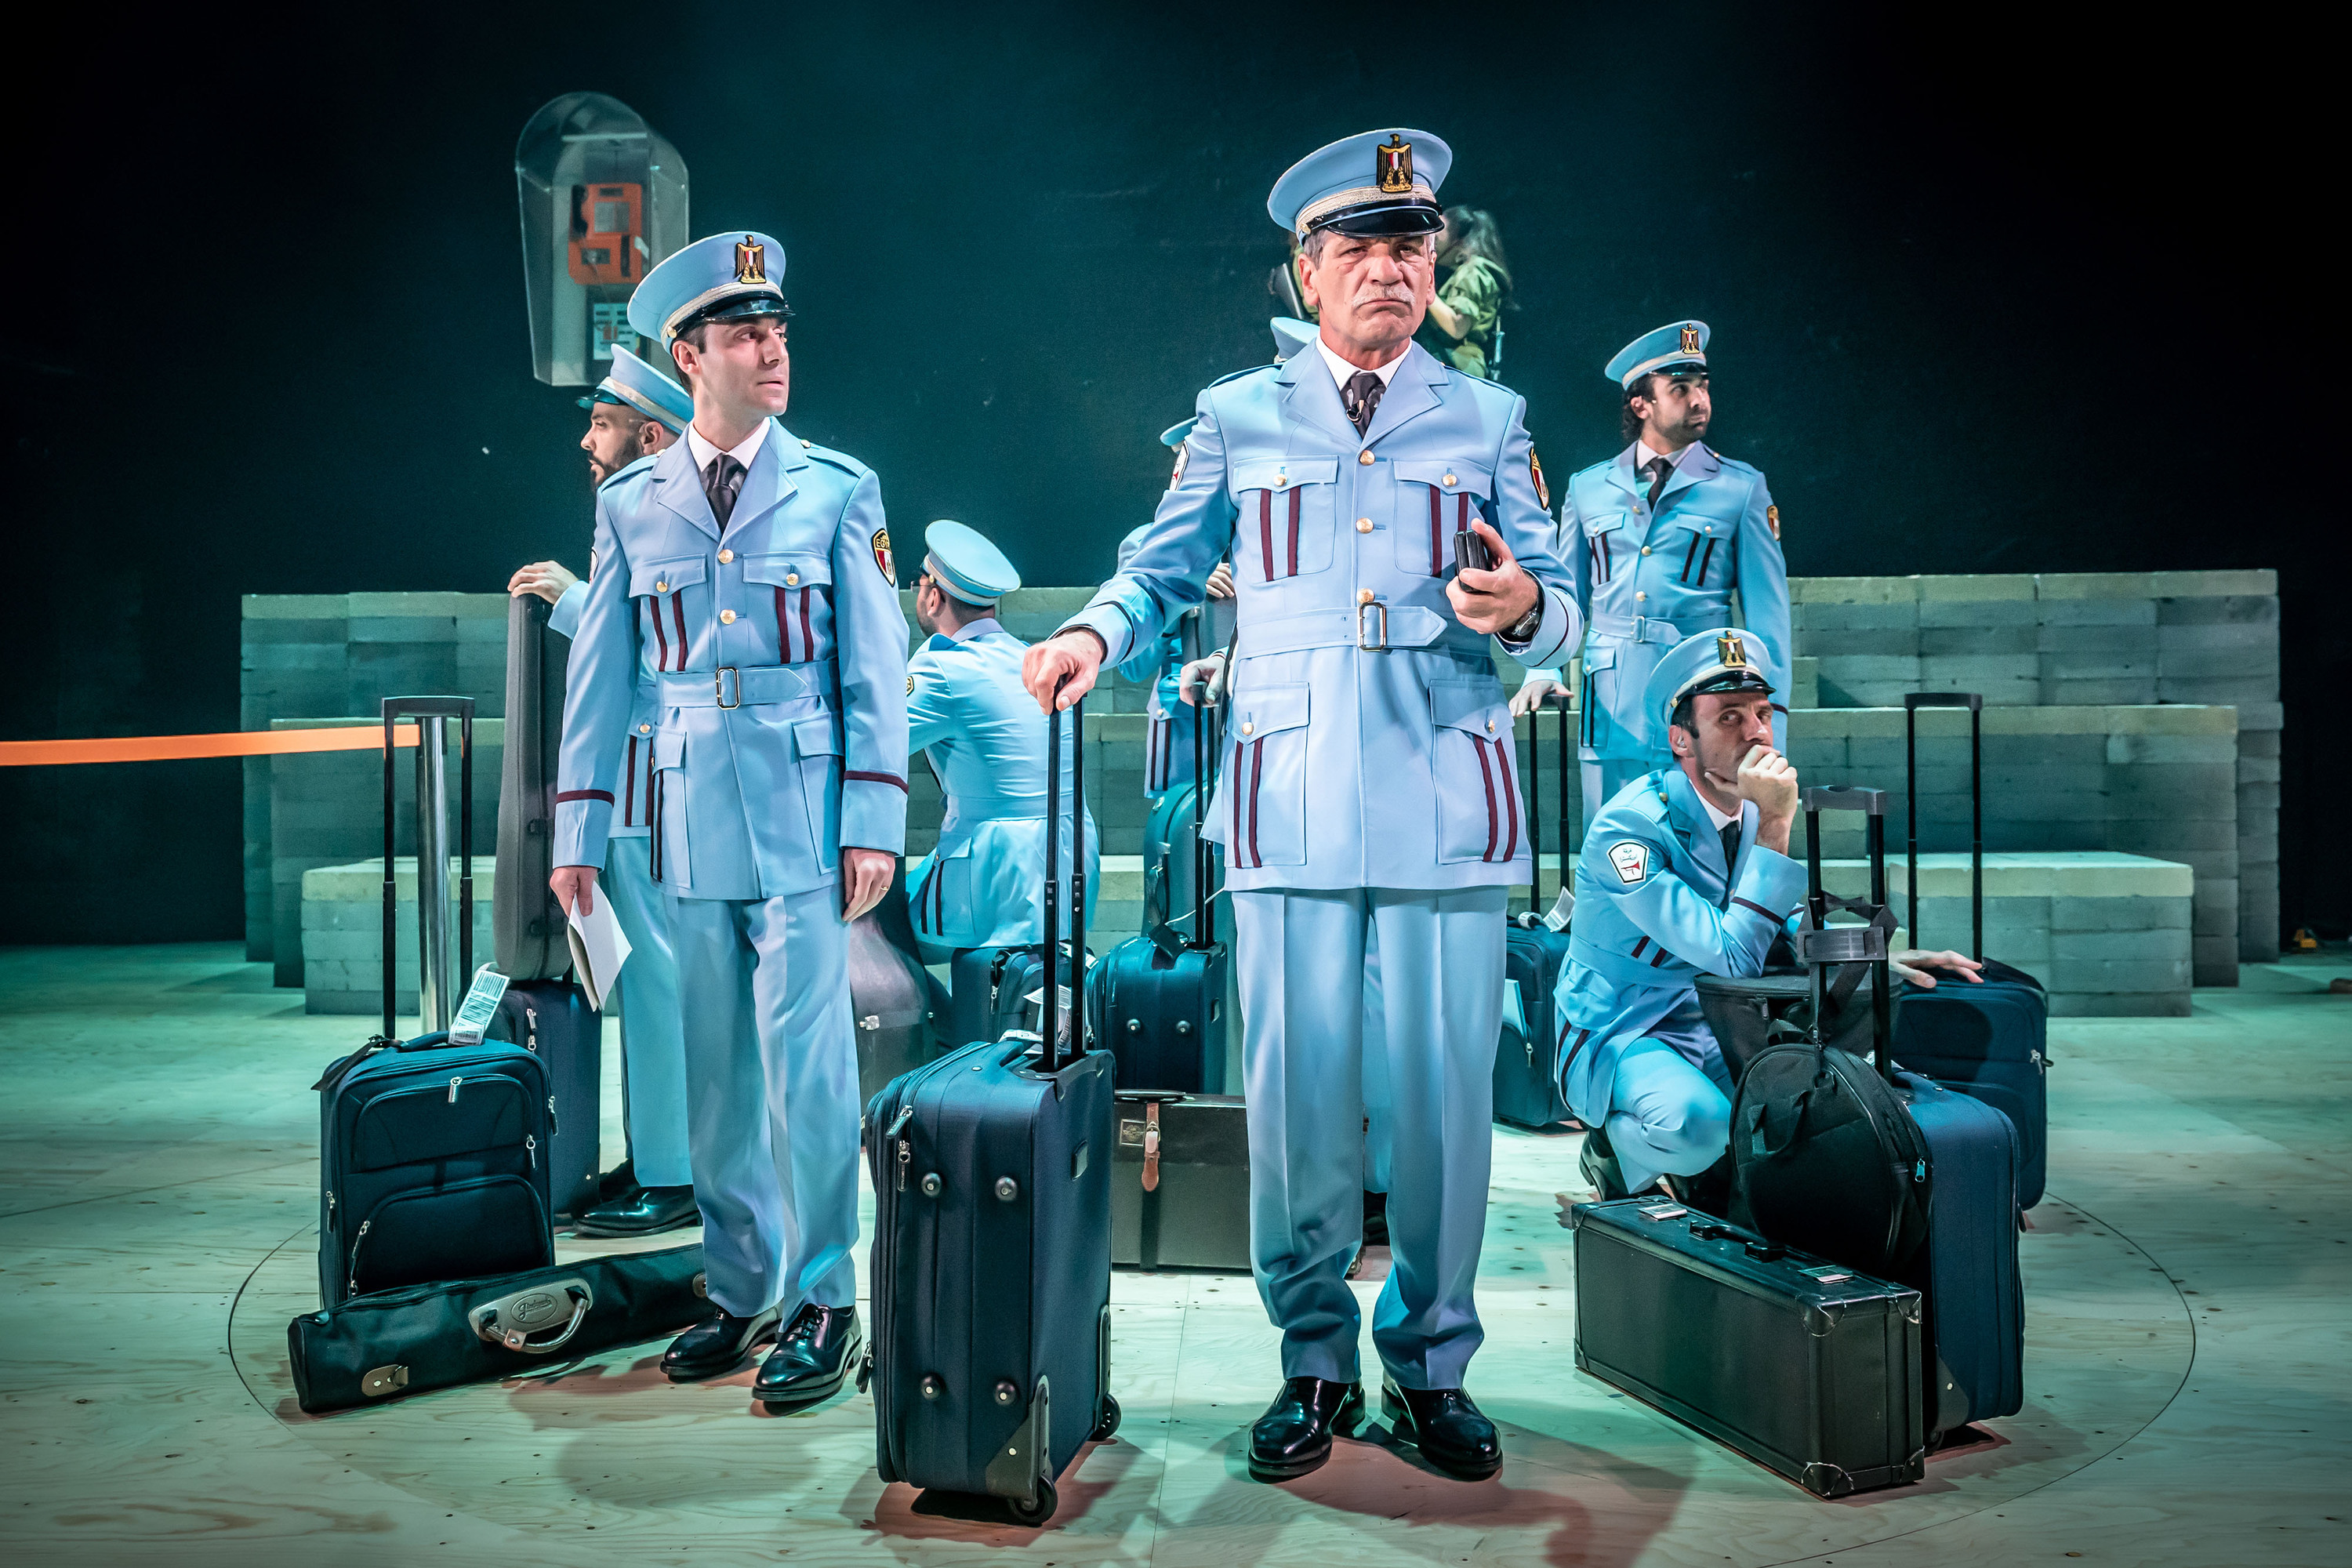 the band's visit west end review